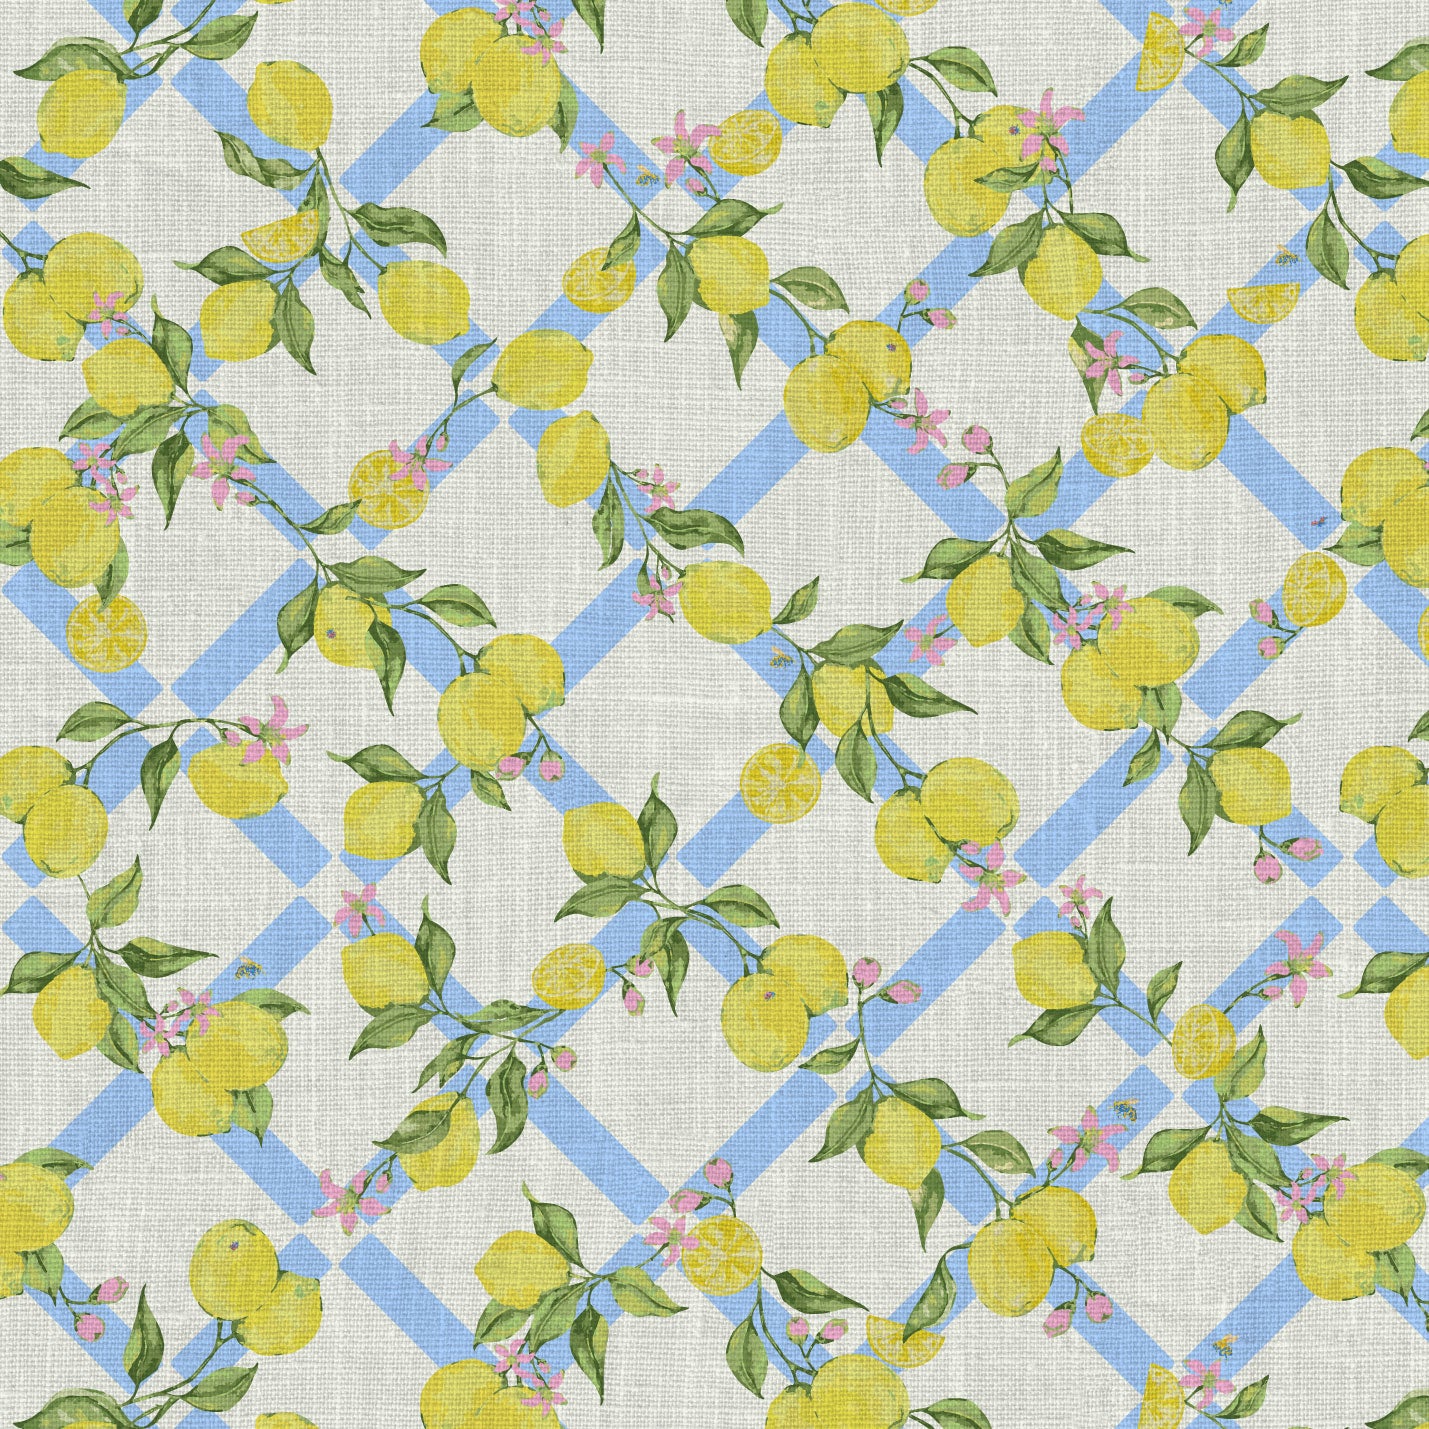 Linen wallpaper Natural Textured Eco-Friendly Non-toxic Sustainable Interior Design Retro chic Grand millennial Maximalism Traditional Dopamine decorCoastal Garden Seaside Seashore Waterfront Vacation home styling Retreat Relaxed beach vibes Beach cottage Shoreline Oceanfront preppy Nature inspired Vertical Grid lemons fruit food Cottage core Countryside Vintage Imperfect Rural Farm core rustic stripe yellow pink flowers lattice botanical yellow green leaf french blue pale baby kids sky blue